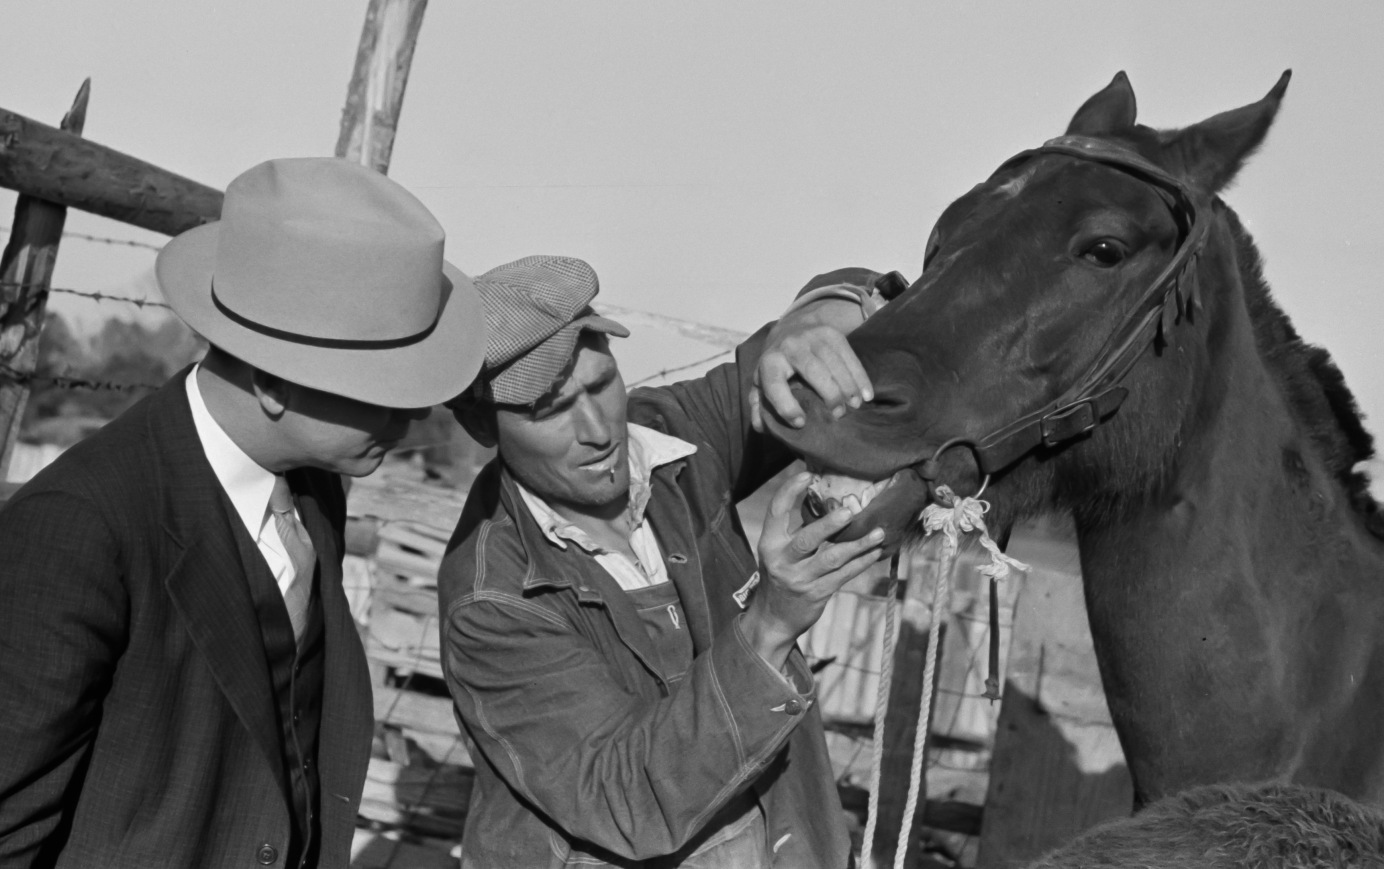 Title: Mr. Hydrick, county supervisor, and Mr. Melody Tillery examining mouth and teeth of his mare, which has mule colt. Pike County, near Tray, Alabama. Public domain photo by Marion Post Walcott.